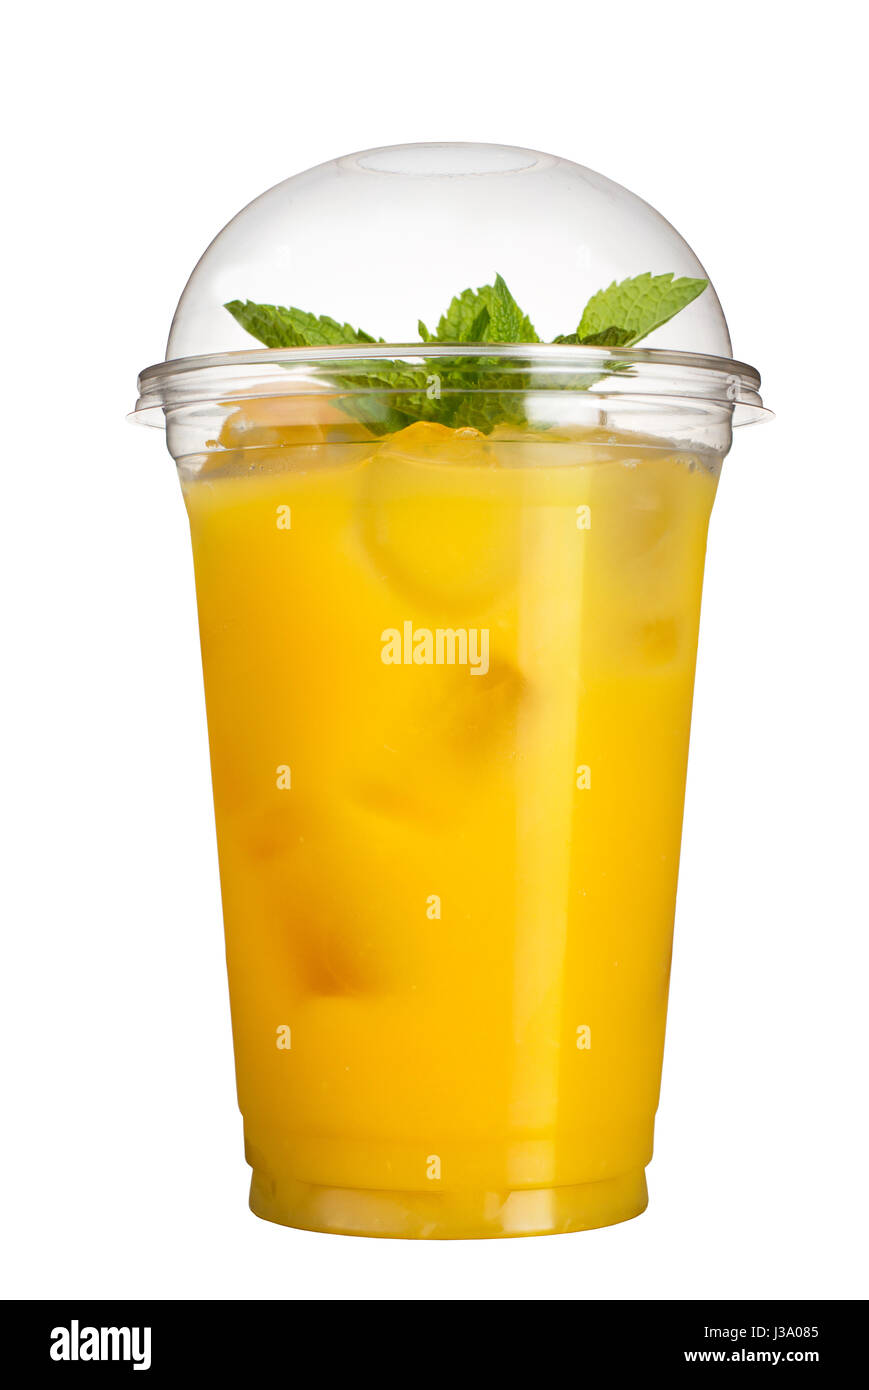 Juice Cup Photos and Images